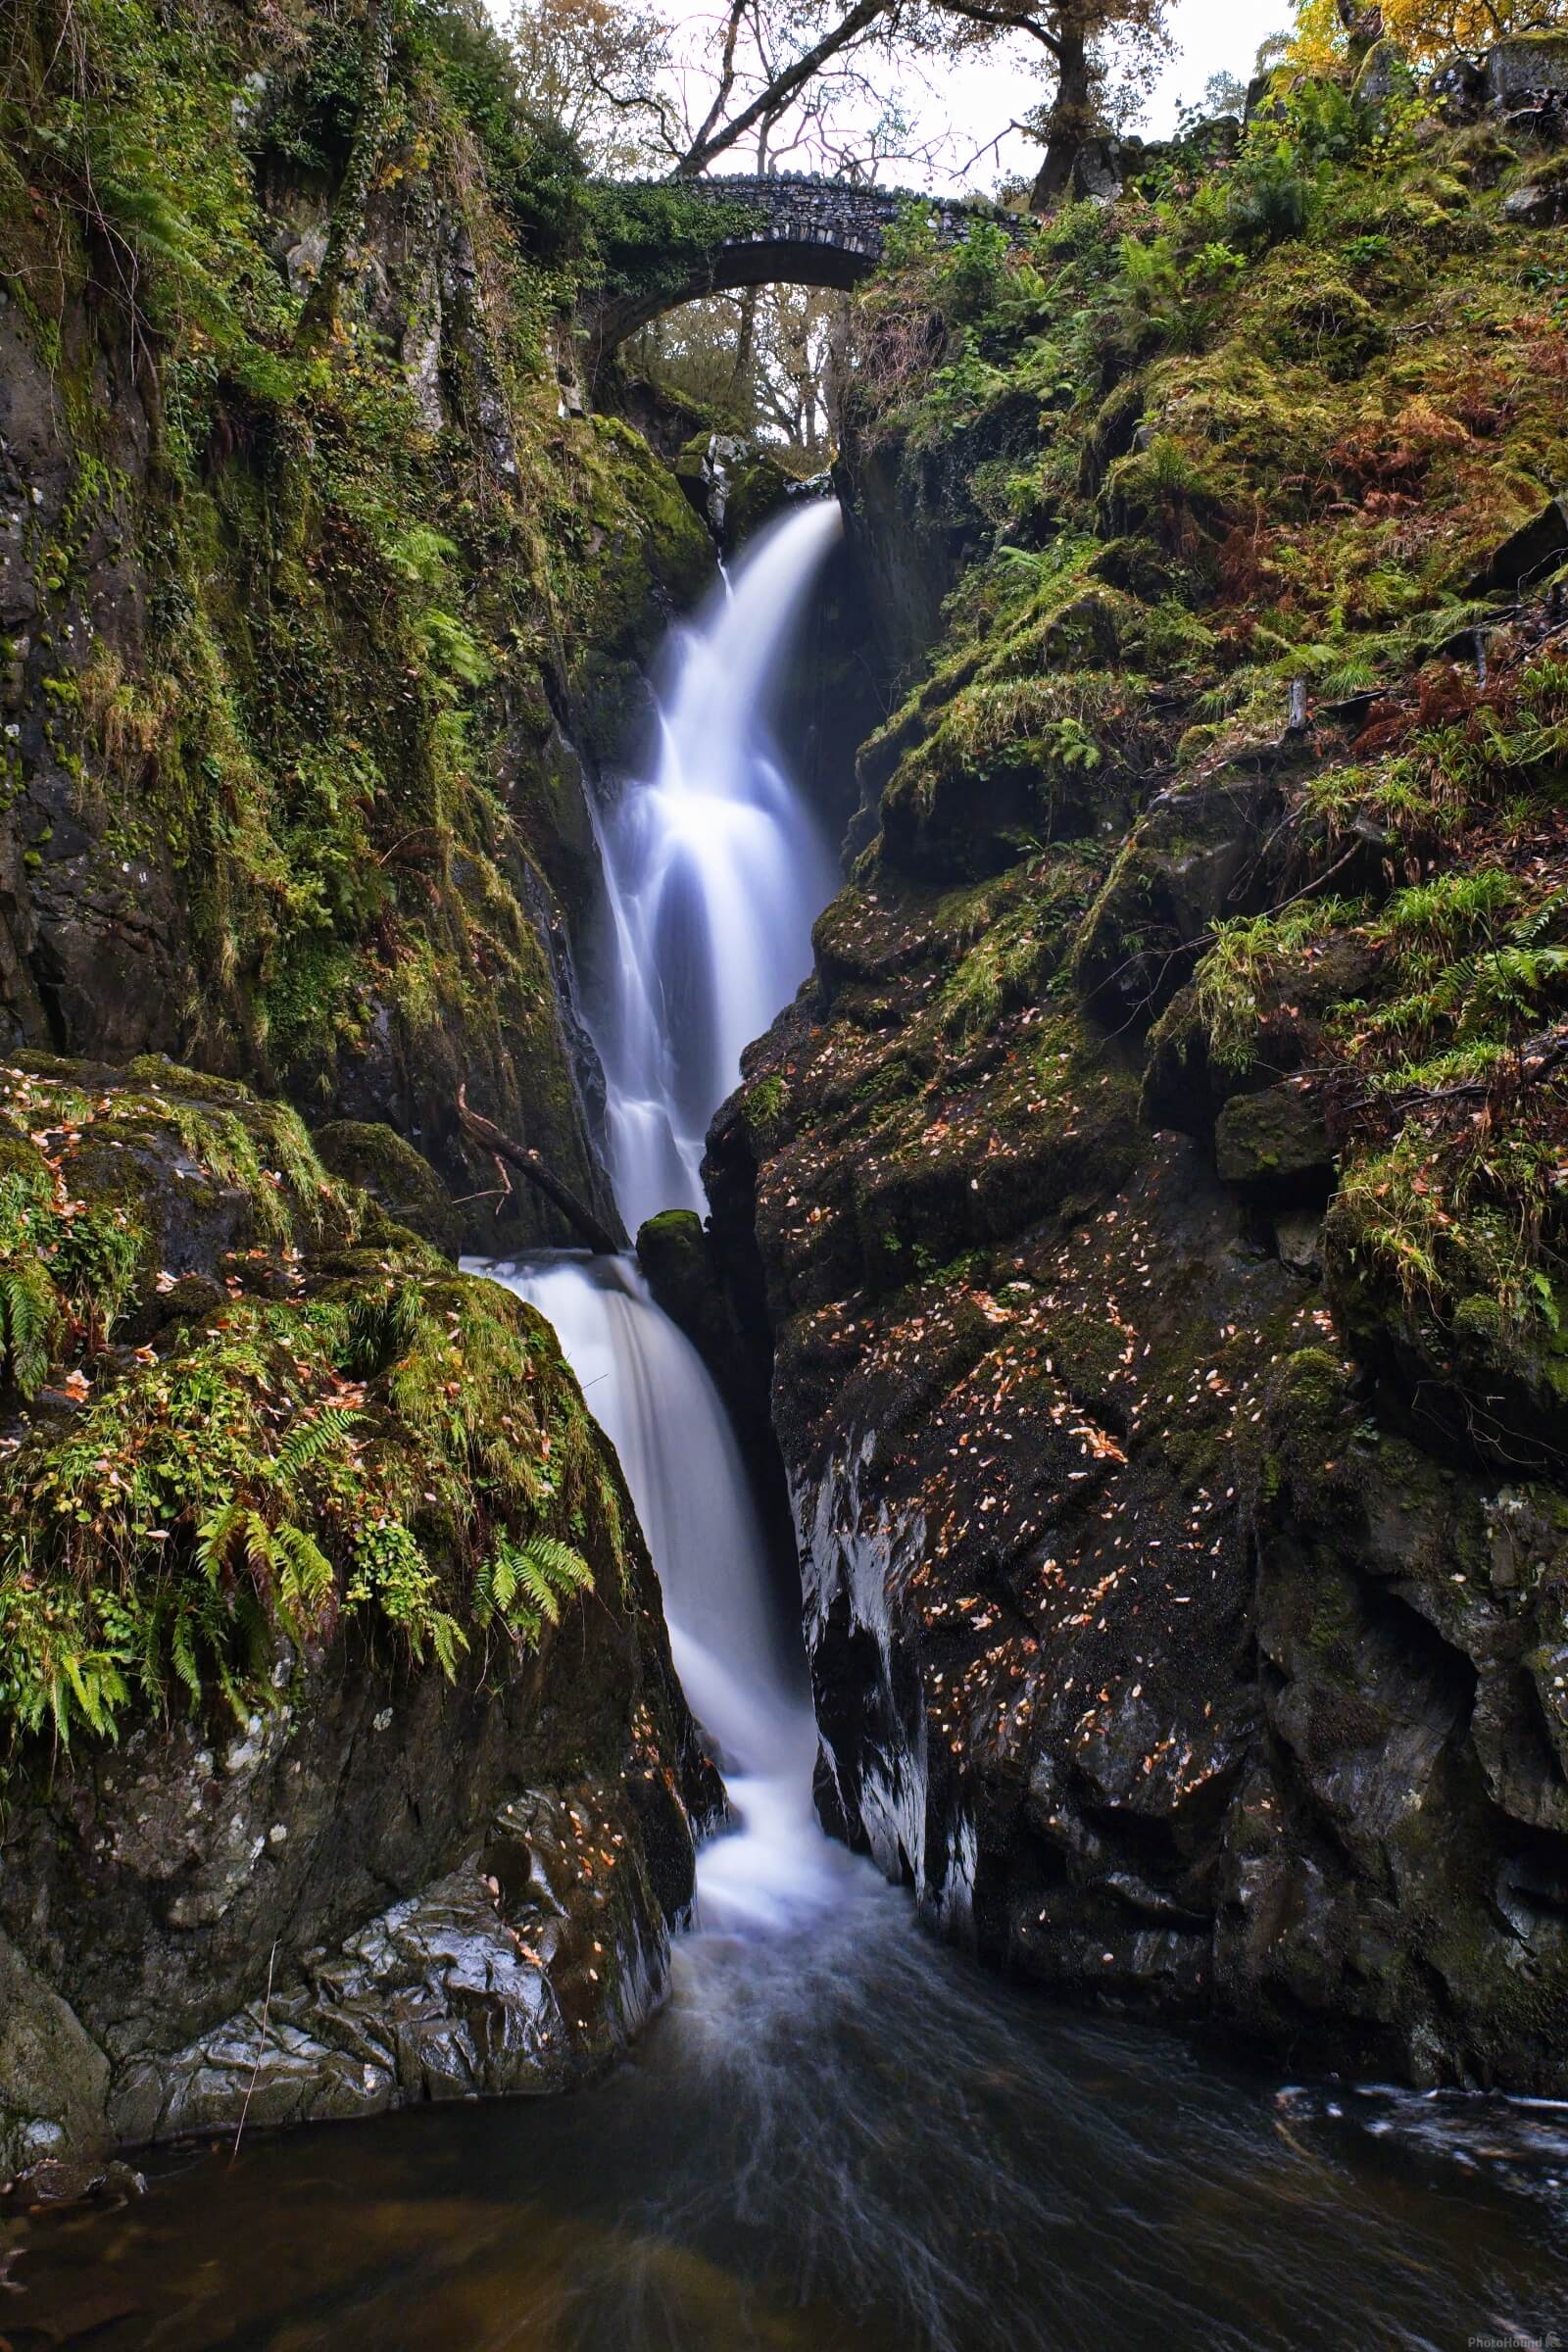 Image of Aira Force and High Forces, Lake District by Gary Calland